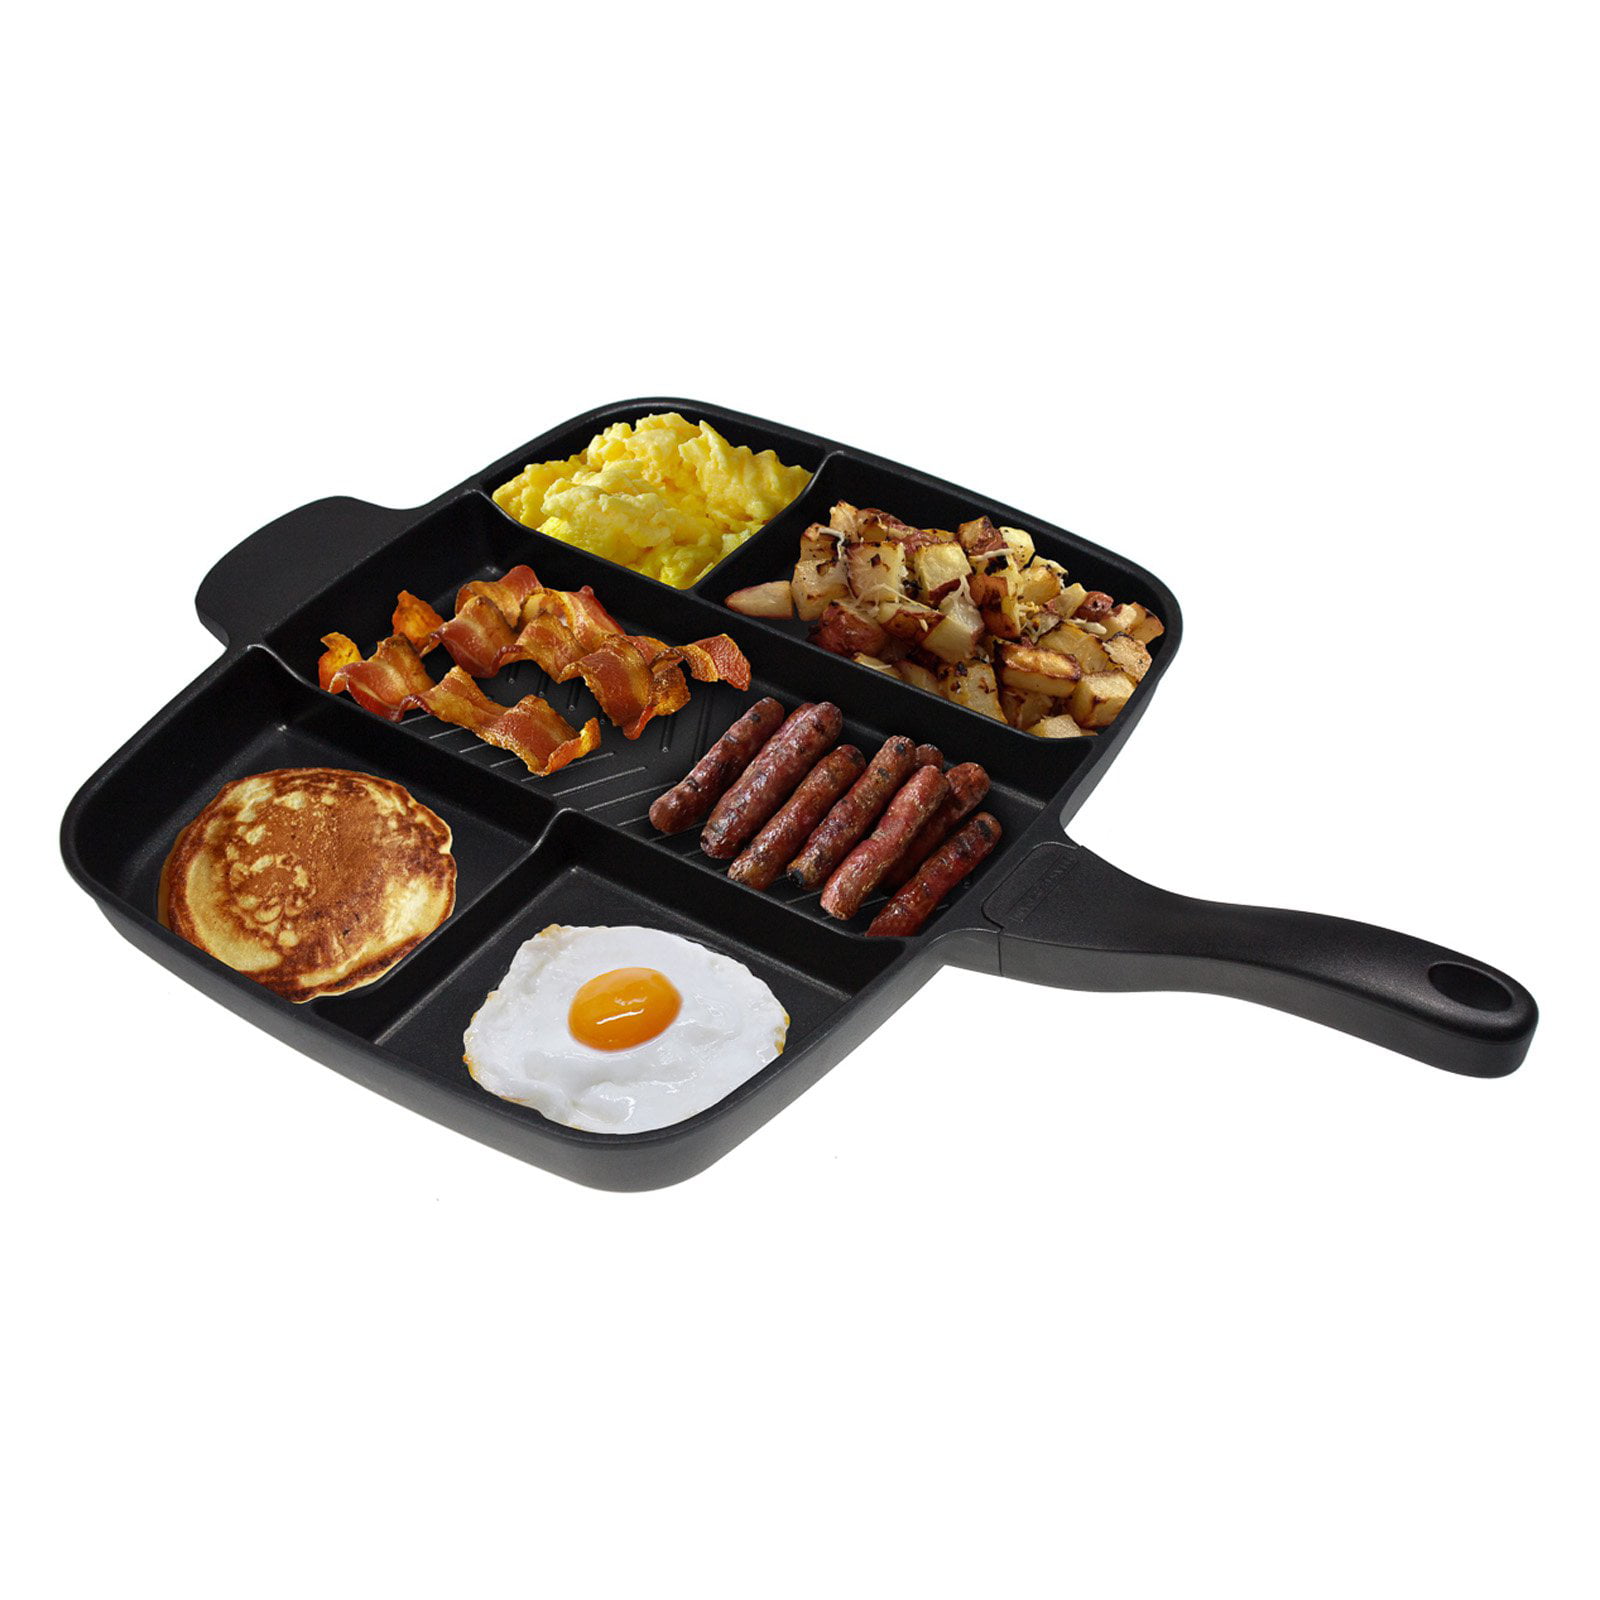  MasterPan Non-Stick Grill Pan with Folding Wooden Handle, 8,  Black and Brown: Home & Kitchen